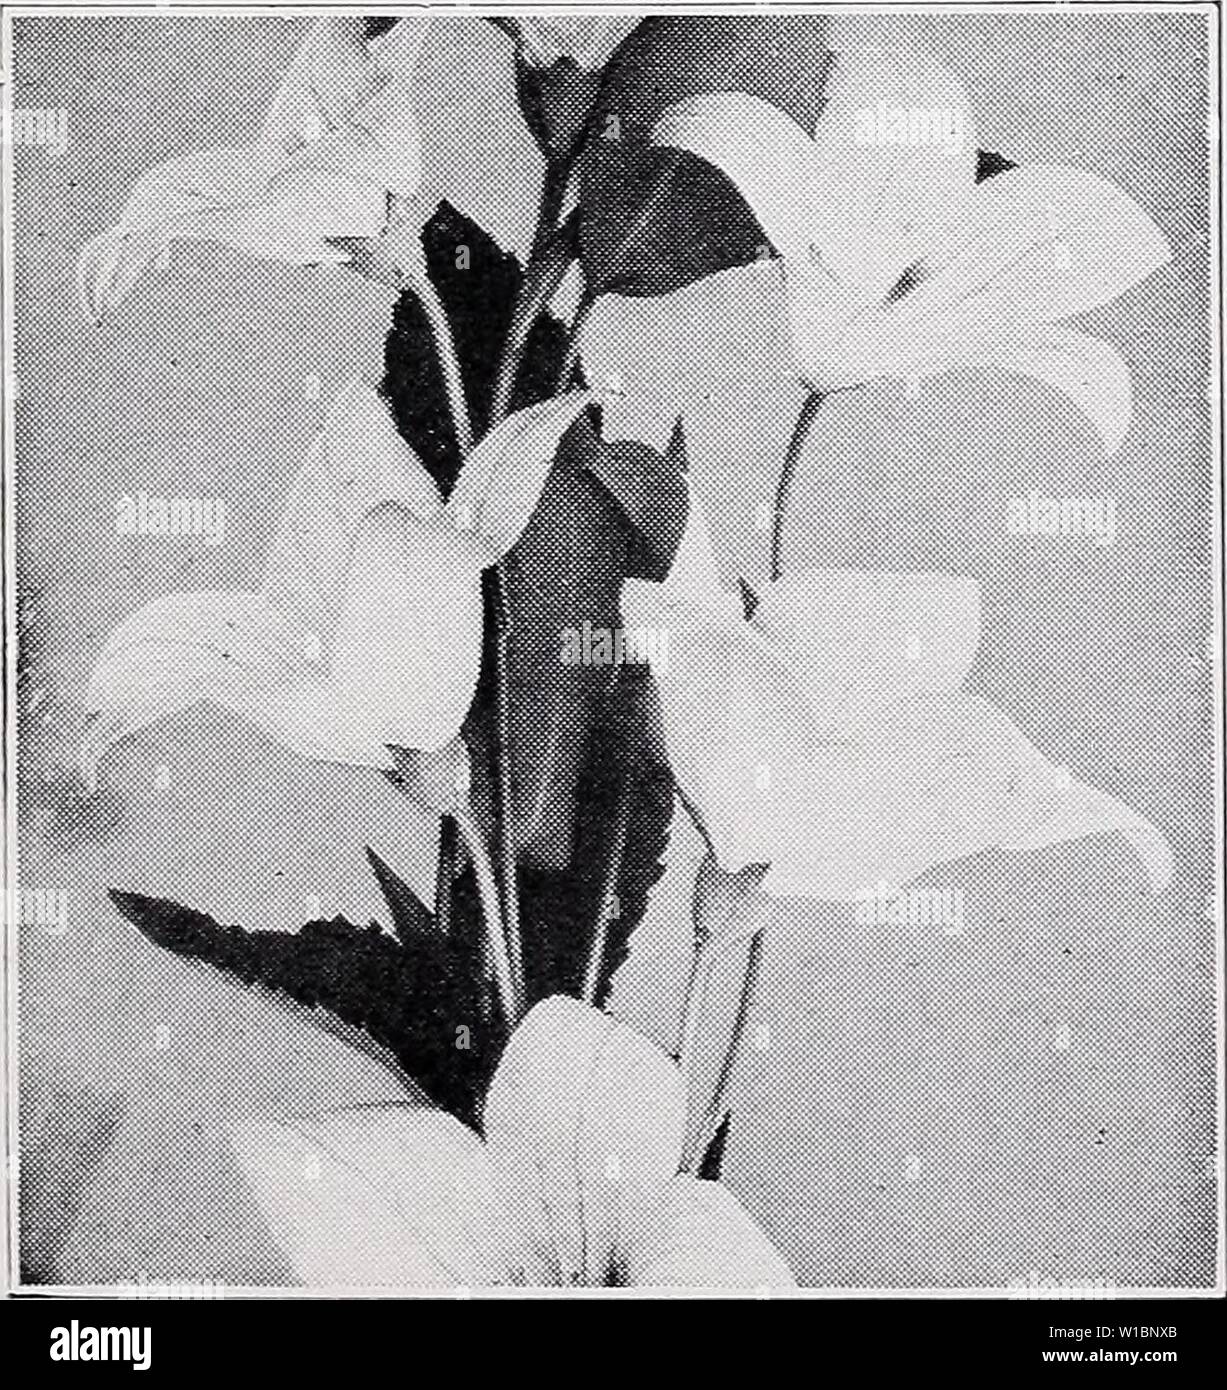 Archive image from page 44 of Descriptive price list (1935). Descriptive price list . descriptiveprice00cmho 1 Year: 1935  Phlox, Beacon. Premier Ministre. White with red eye. Each, 20c; 10, $1.50; 100, $13.00. Prof esse r Virchow. Bright carmine overlaid with brilliant orange-scarlet Each, 20c; 10, $1.50; 100, $13.00. Rheinlander. Soft salmon-pink ; deep red eye. Each, 20c; 10, $1.50; 100, $13.00. Rijnstroom. Lively rose-pink. Each, 20c; 10, $1.50; 100, $13.00. R. P. Struthers. Light crimson-pink; dark center. Each, 20c; 10, $1.50; 100, $13.00. Special French. Glowing pink. Mammoth trusses. E Stock Photo